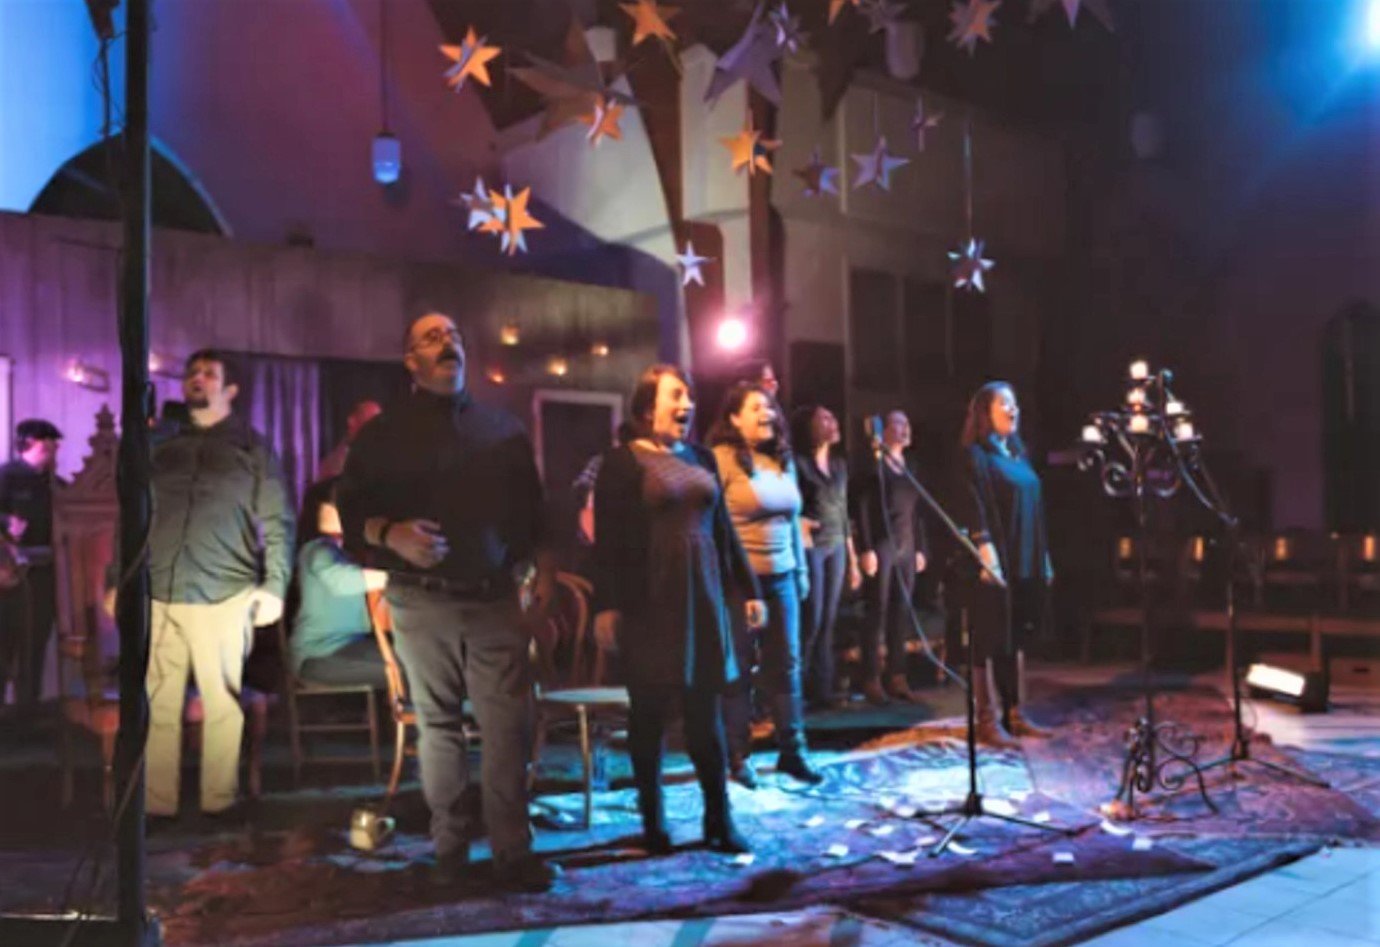 Sweet Tea Shakespeare will present “Behold: A Folk Christmas Cantata” at 7 p.m. Thursday, Friday and Saturday at Holy Trinity Episcopal Church, 1601 Raeford Road.